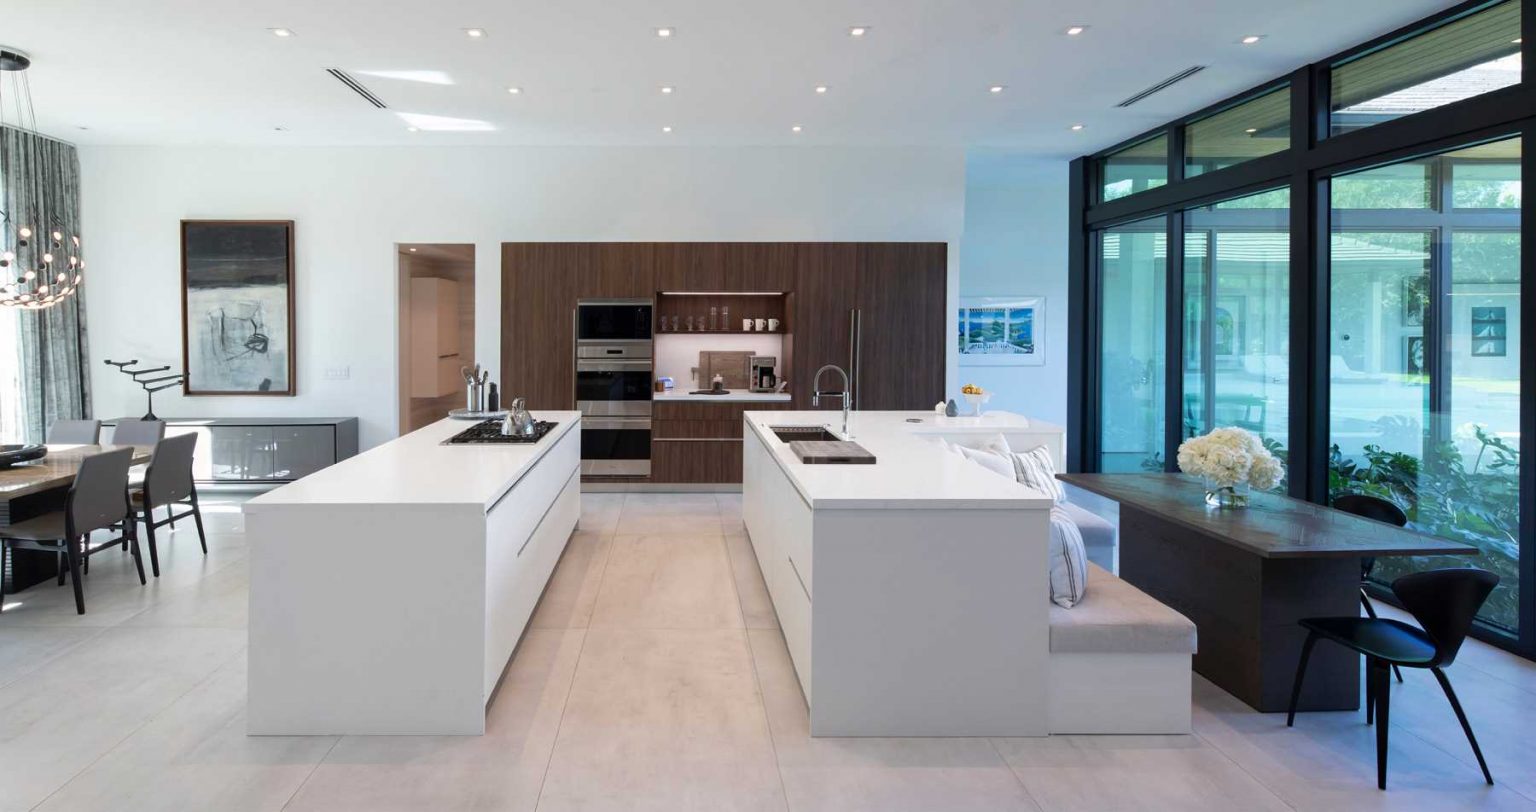 Beautiful house: Design the kitchen island into a relaxing seating area and a comfortable dining area - Photo 2.